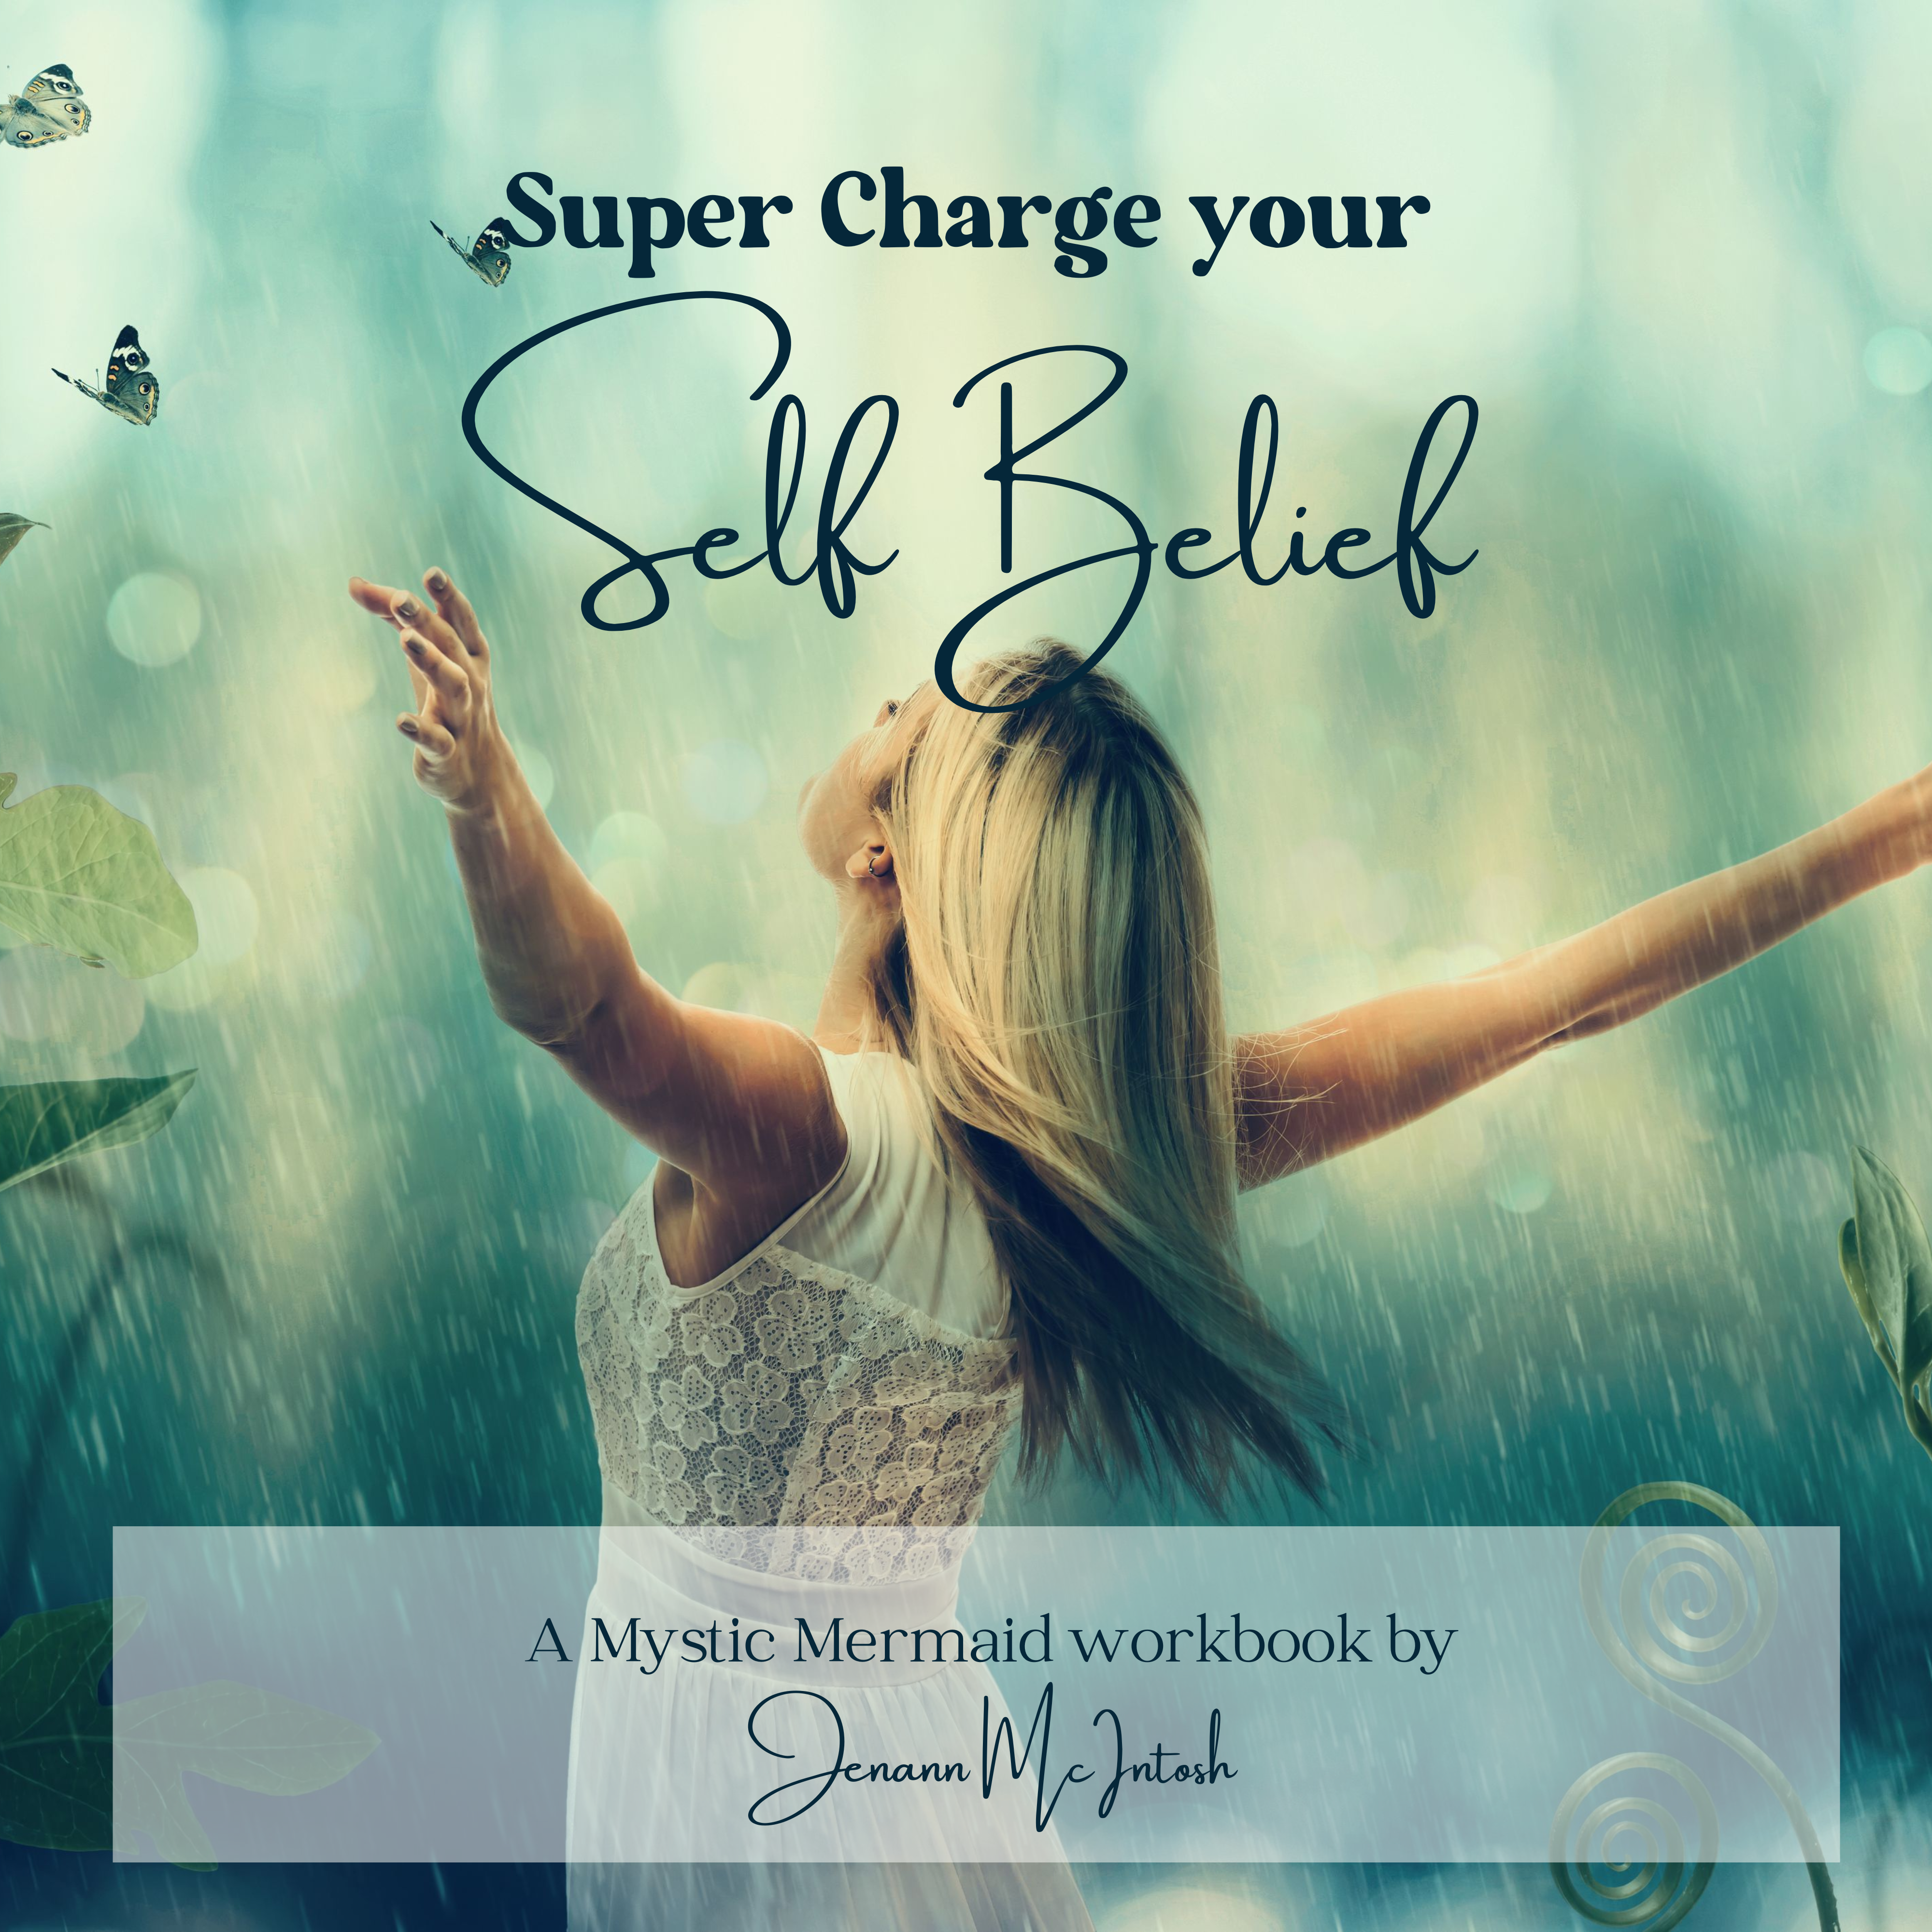 Super Charge your Self Belief - Workbook by Jenann McIntosh